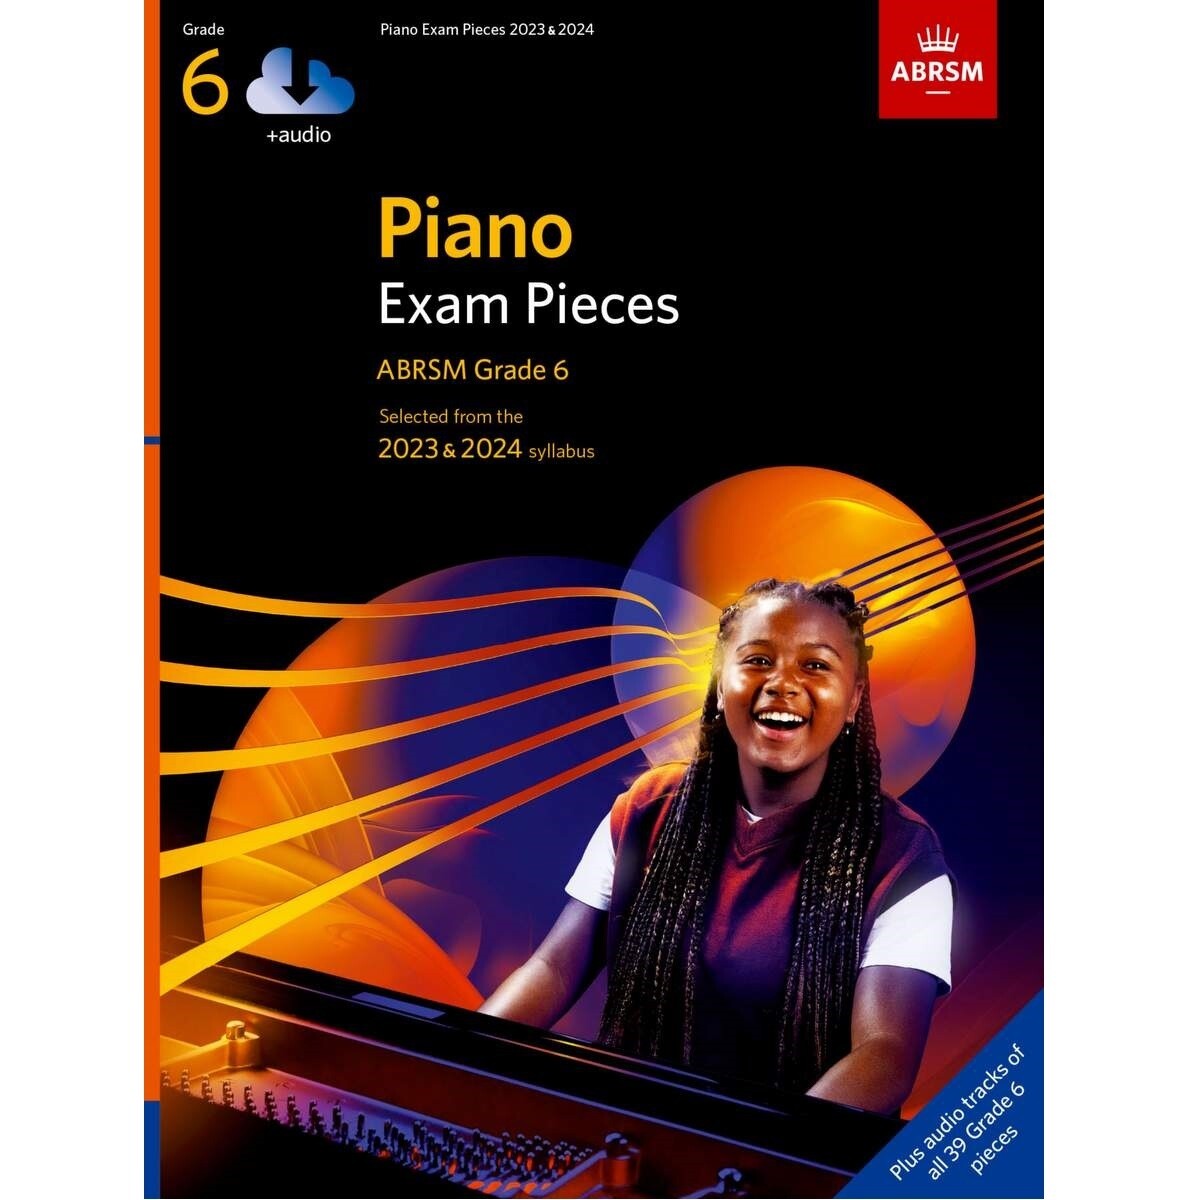 ABRSM Piano Exam Pieces 2023 and 2024 - Grade 6 (Book with Online Audio)